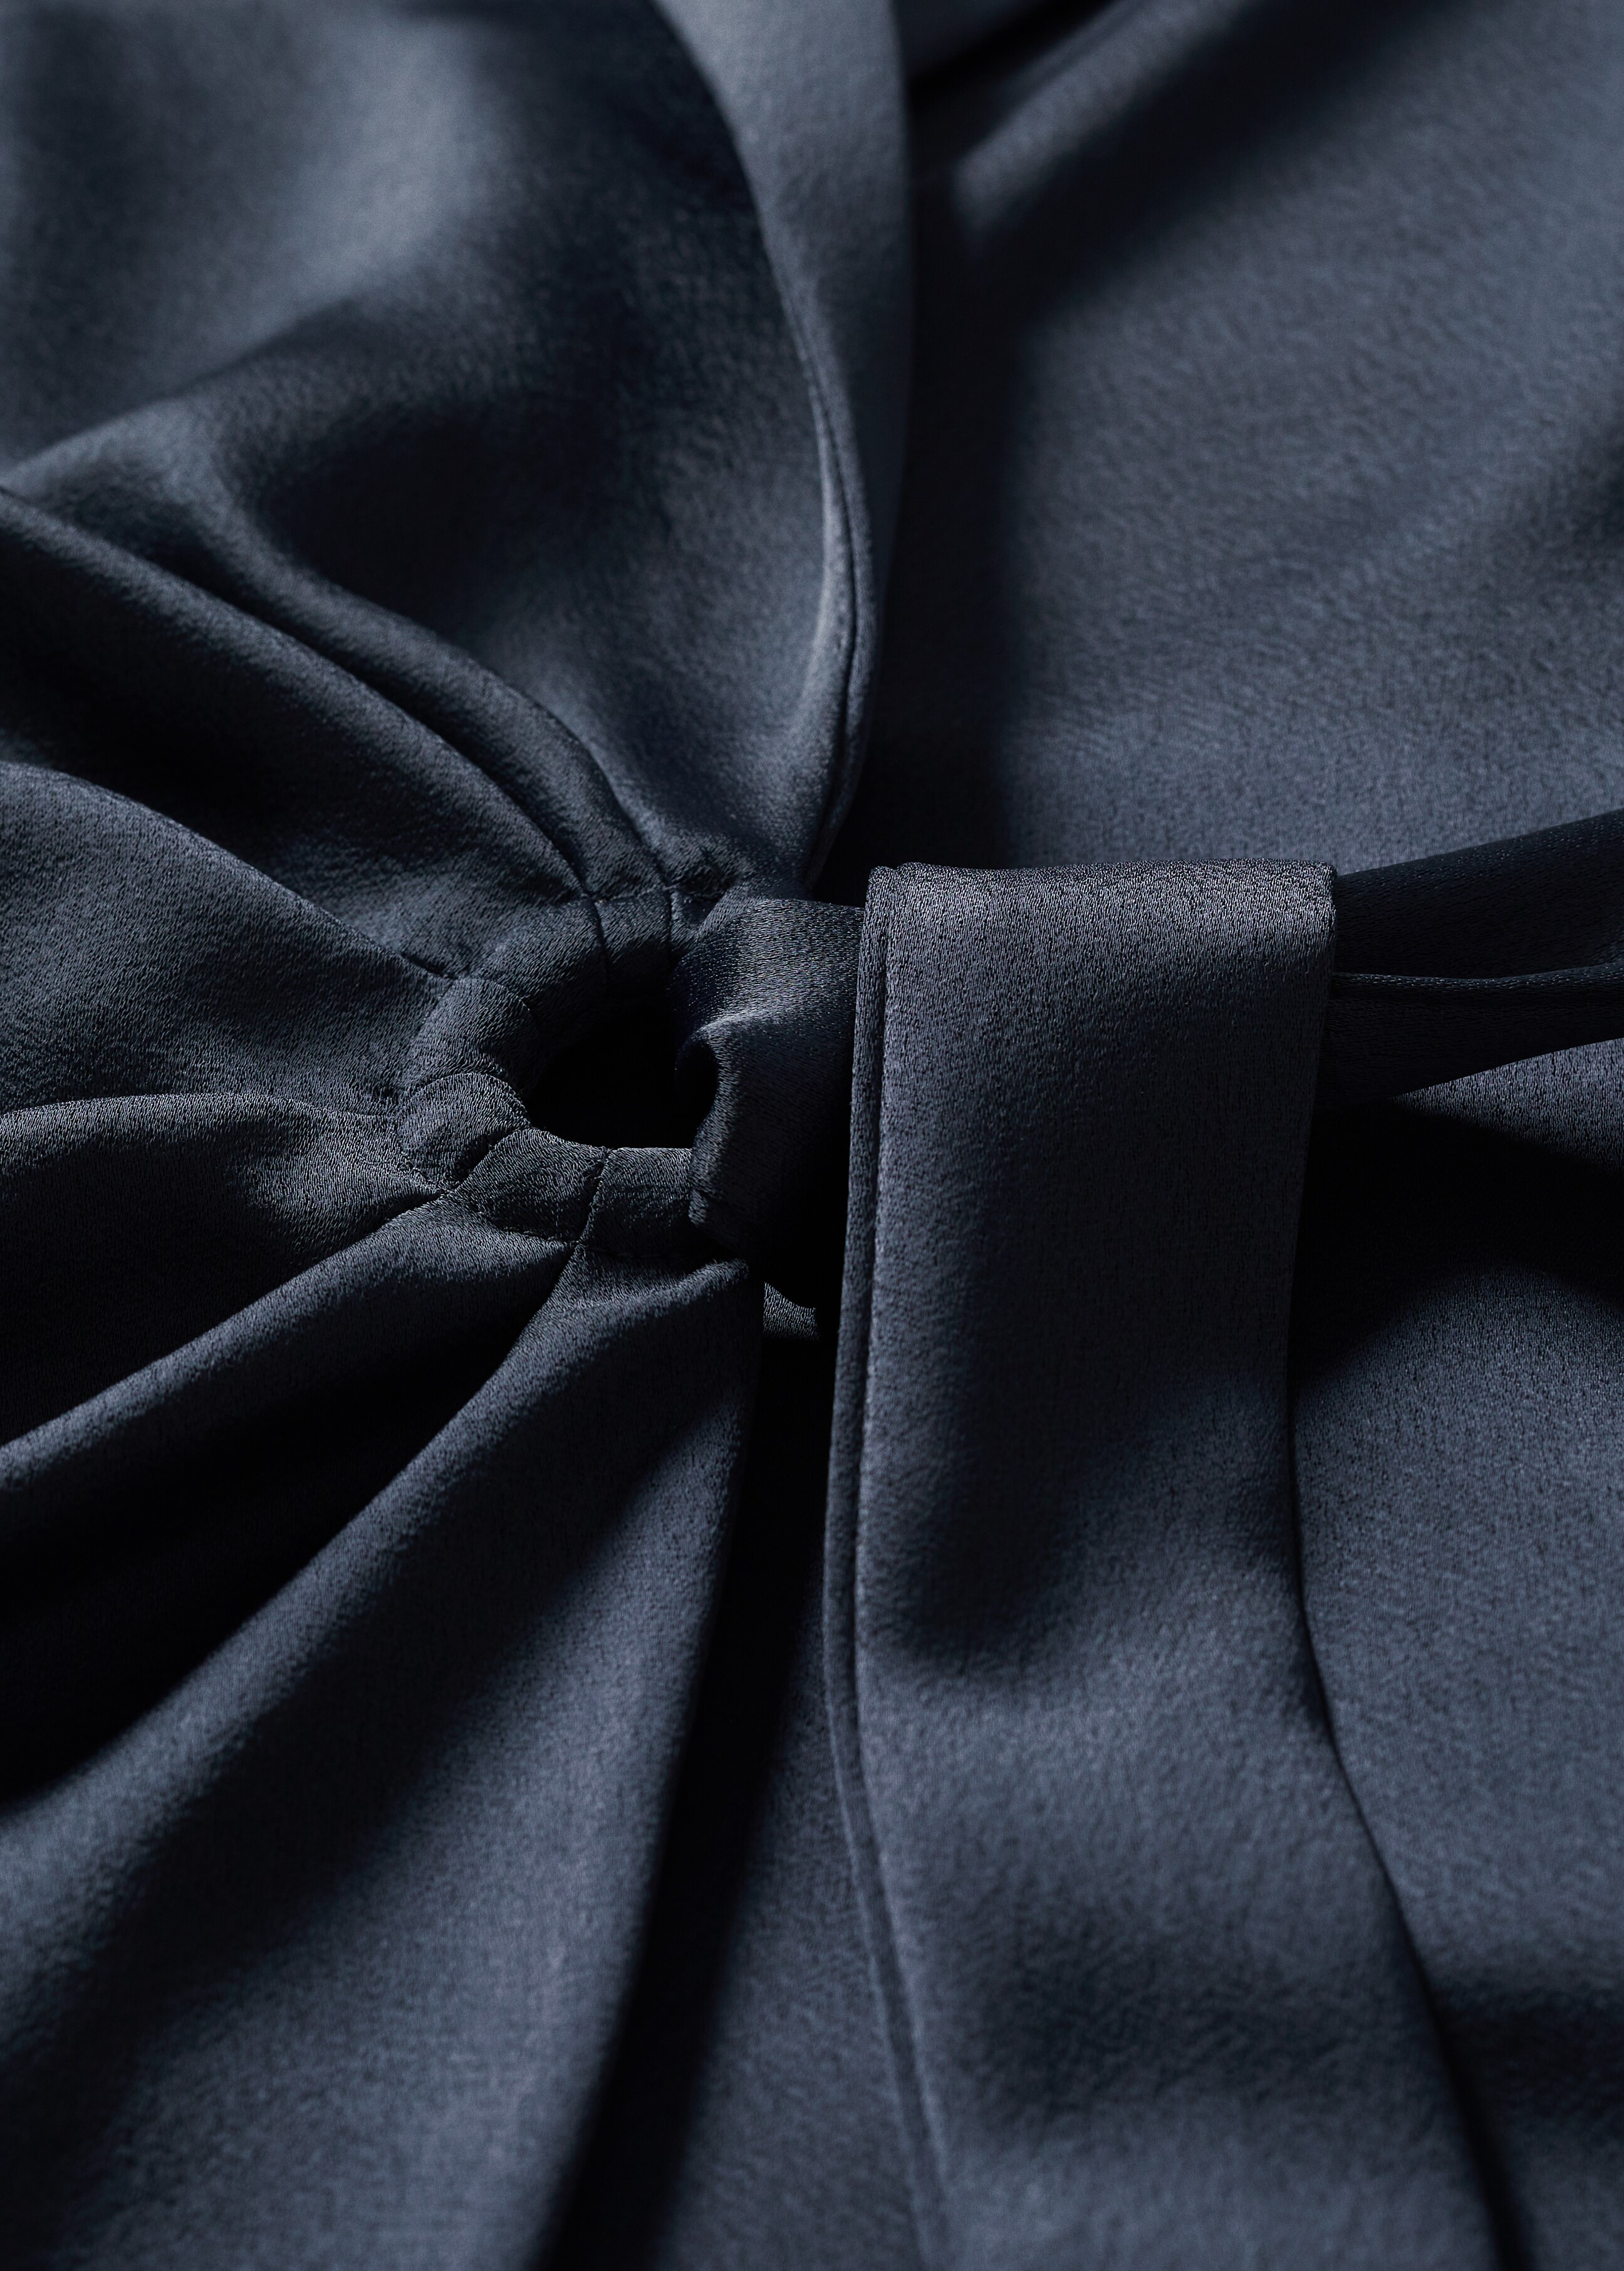 Satin shirt dress - Details of the article 8